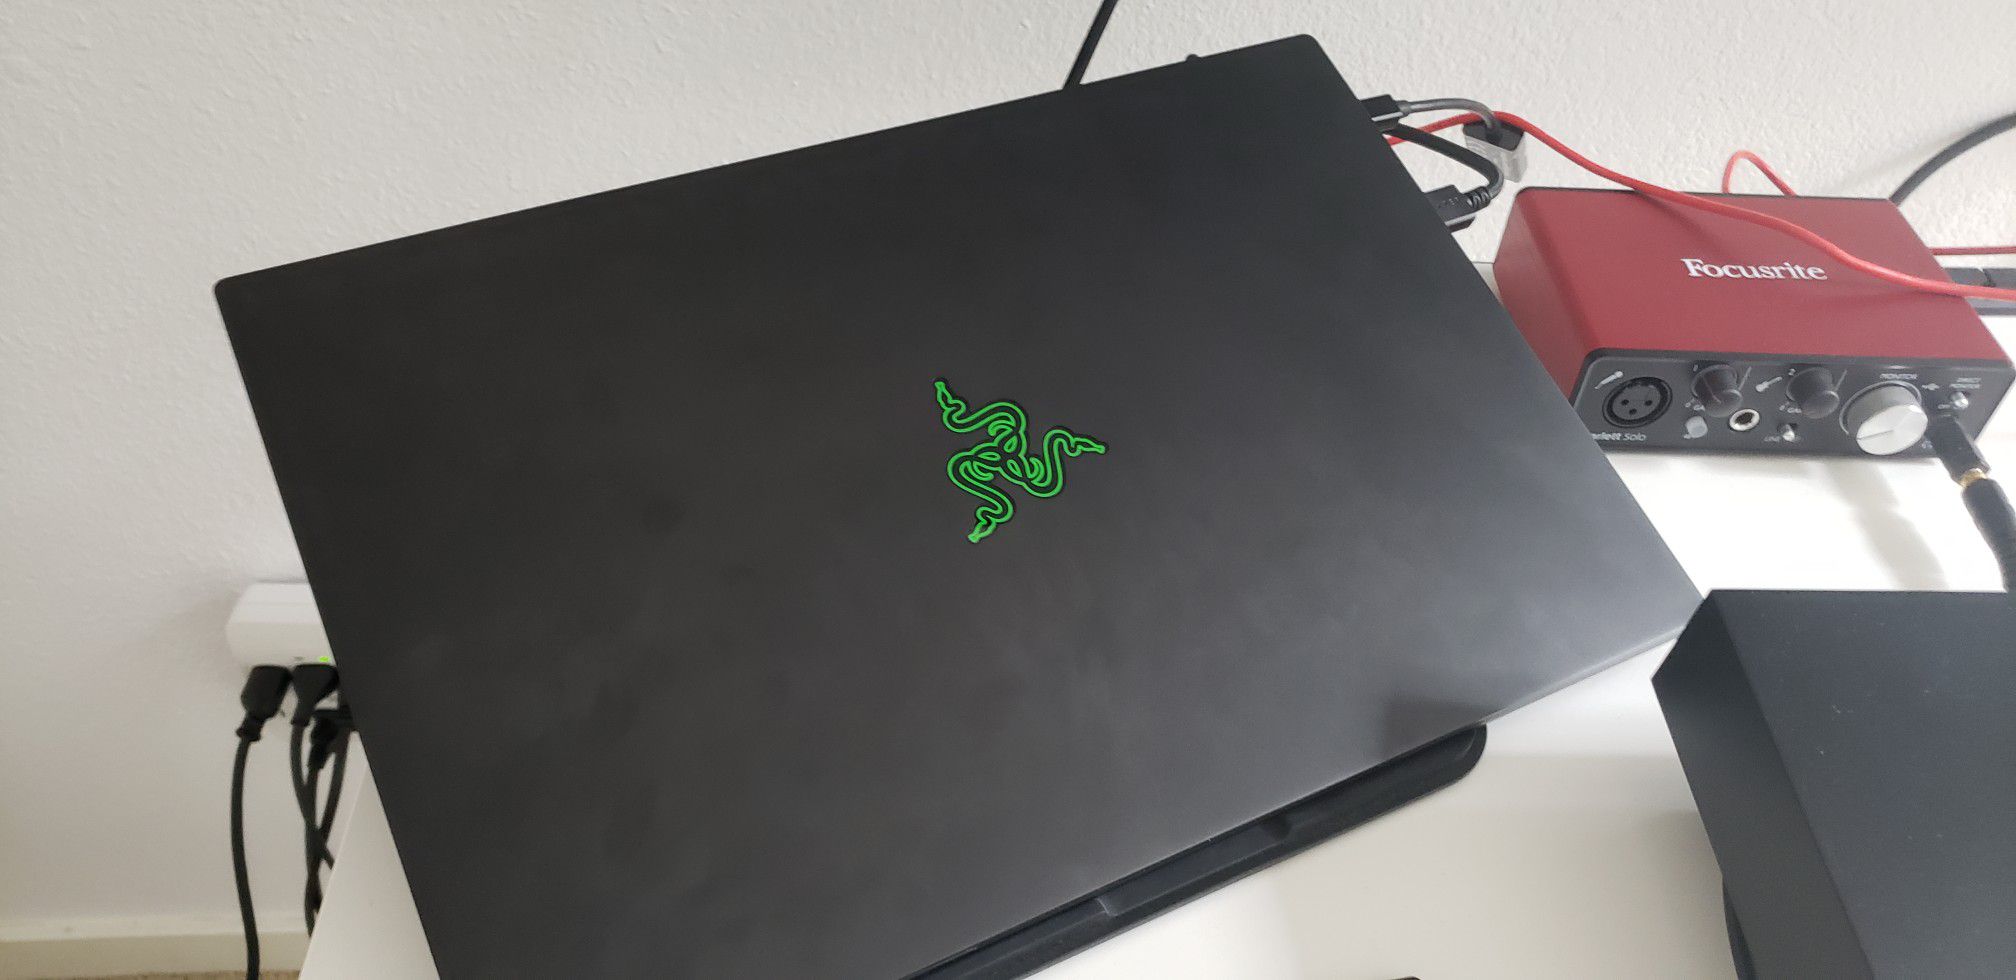 🗣️ PRICE IS FIRM 🗣️ Razer Blade 15 (2018) Gaming Laptop 🗣️ PRICE IS FIRM 🗣️